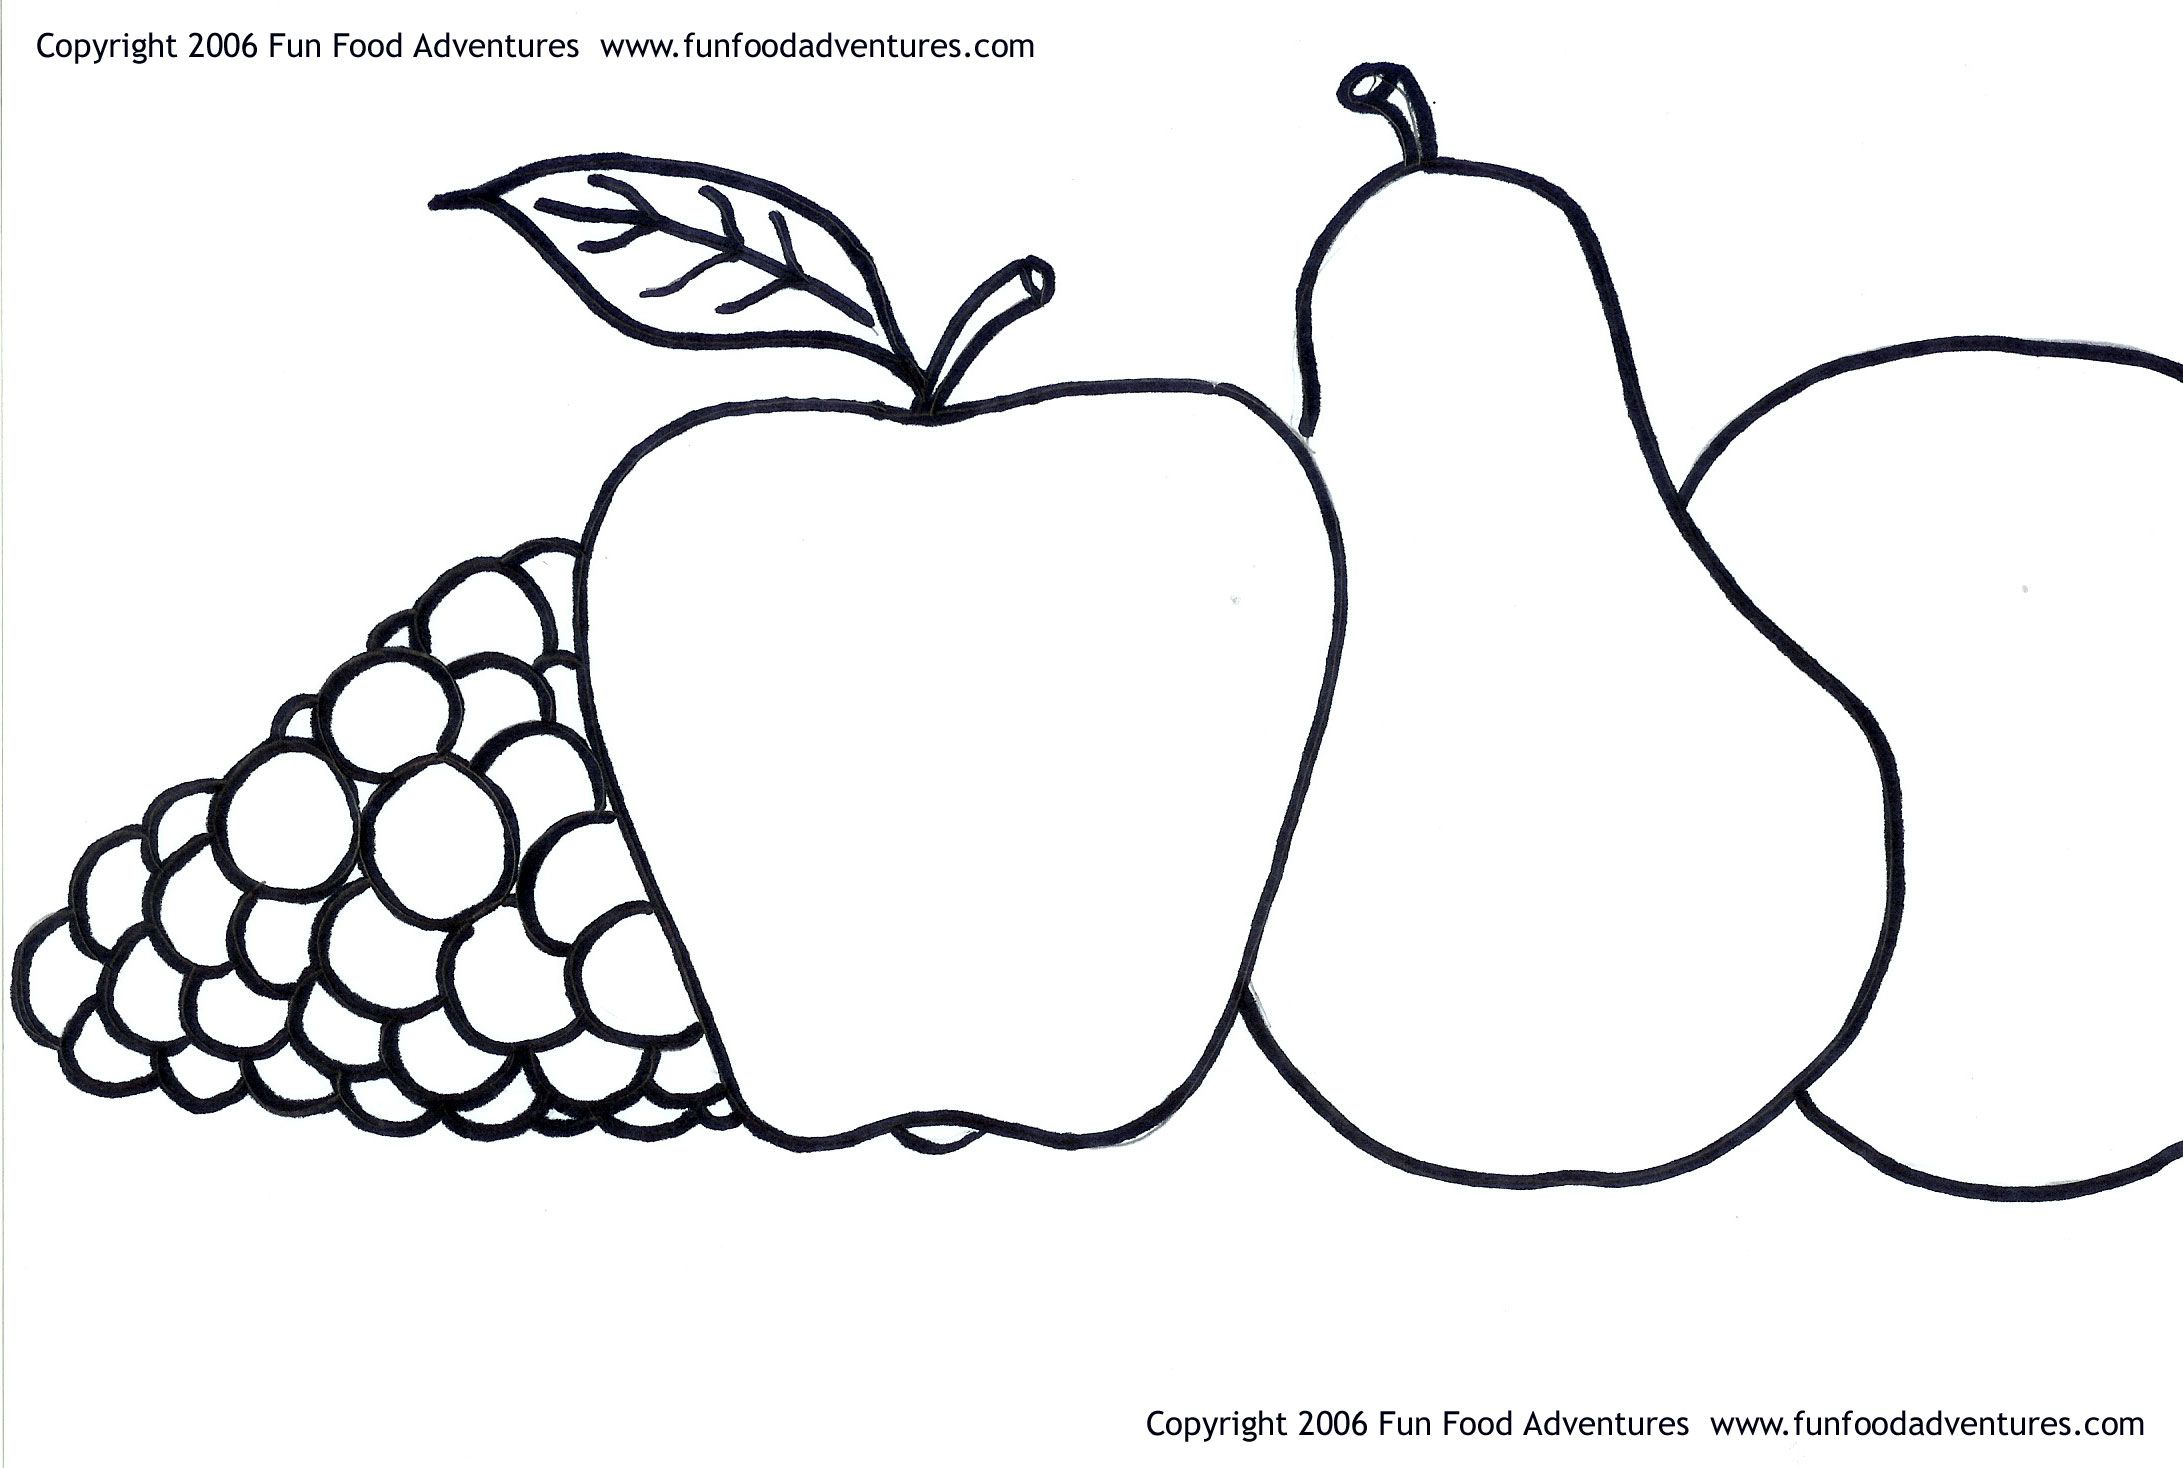 COLORING PICTURE OF FRUIT Â« ONLINE COLORING